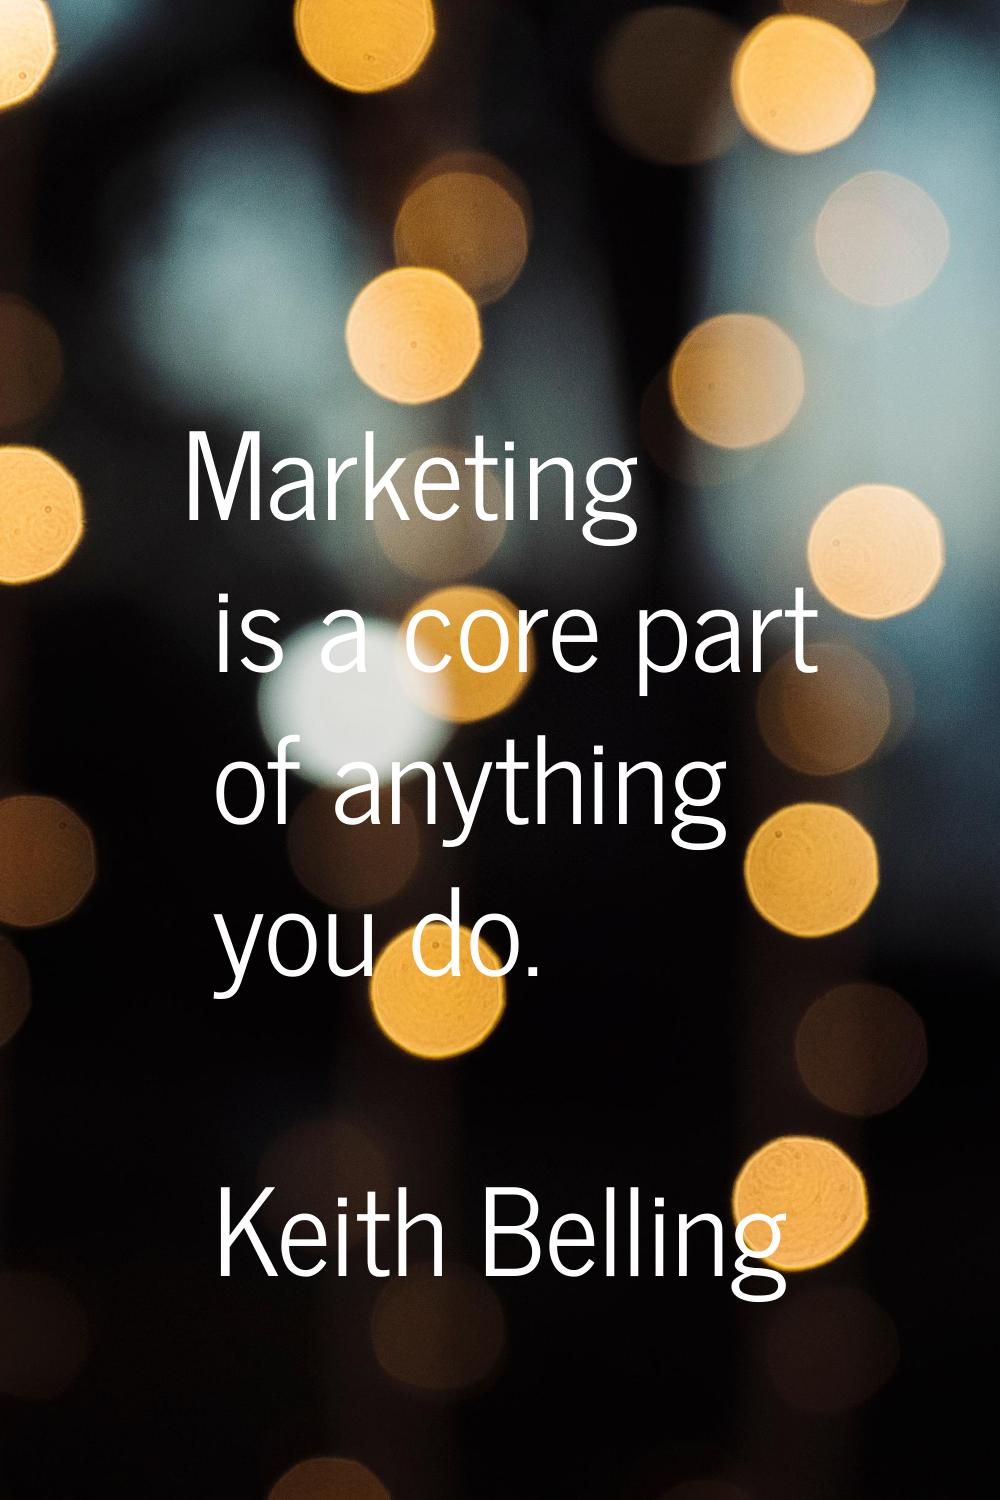 Marketing is a core part of anything you do.